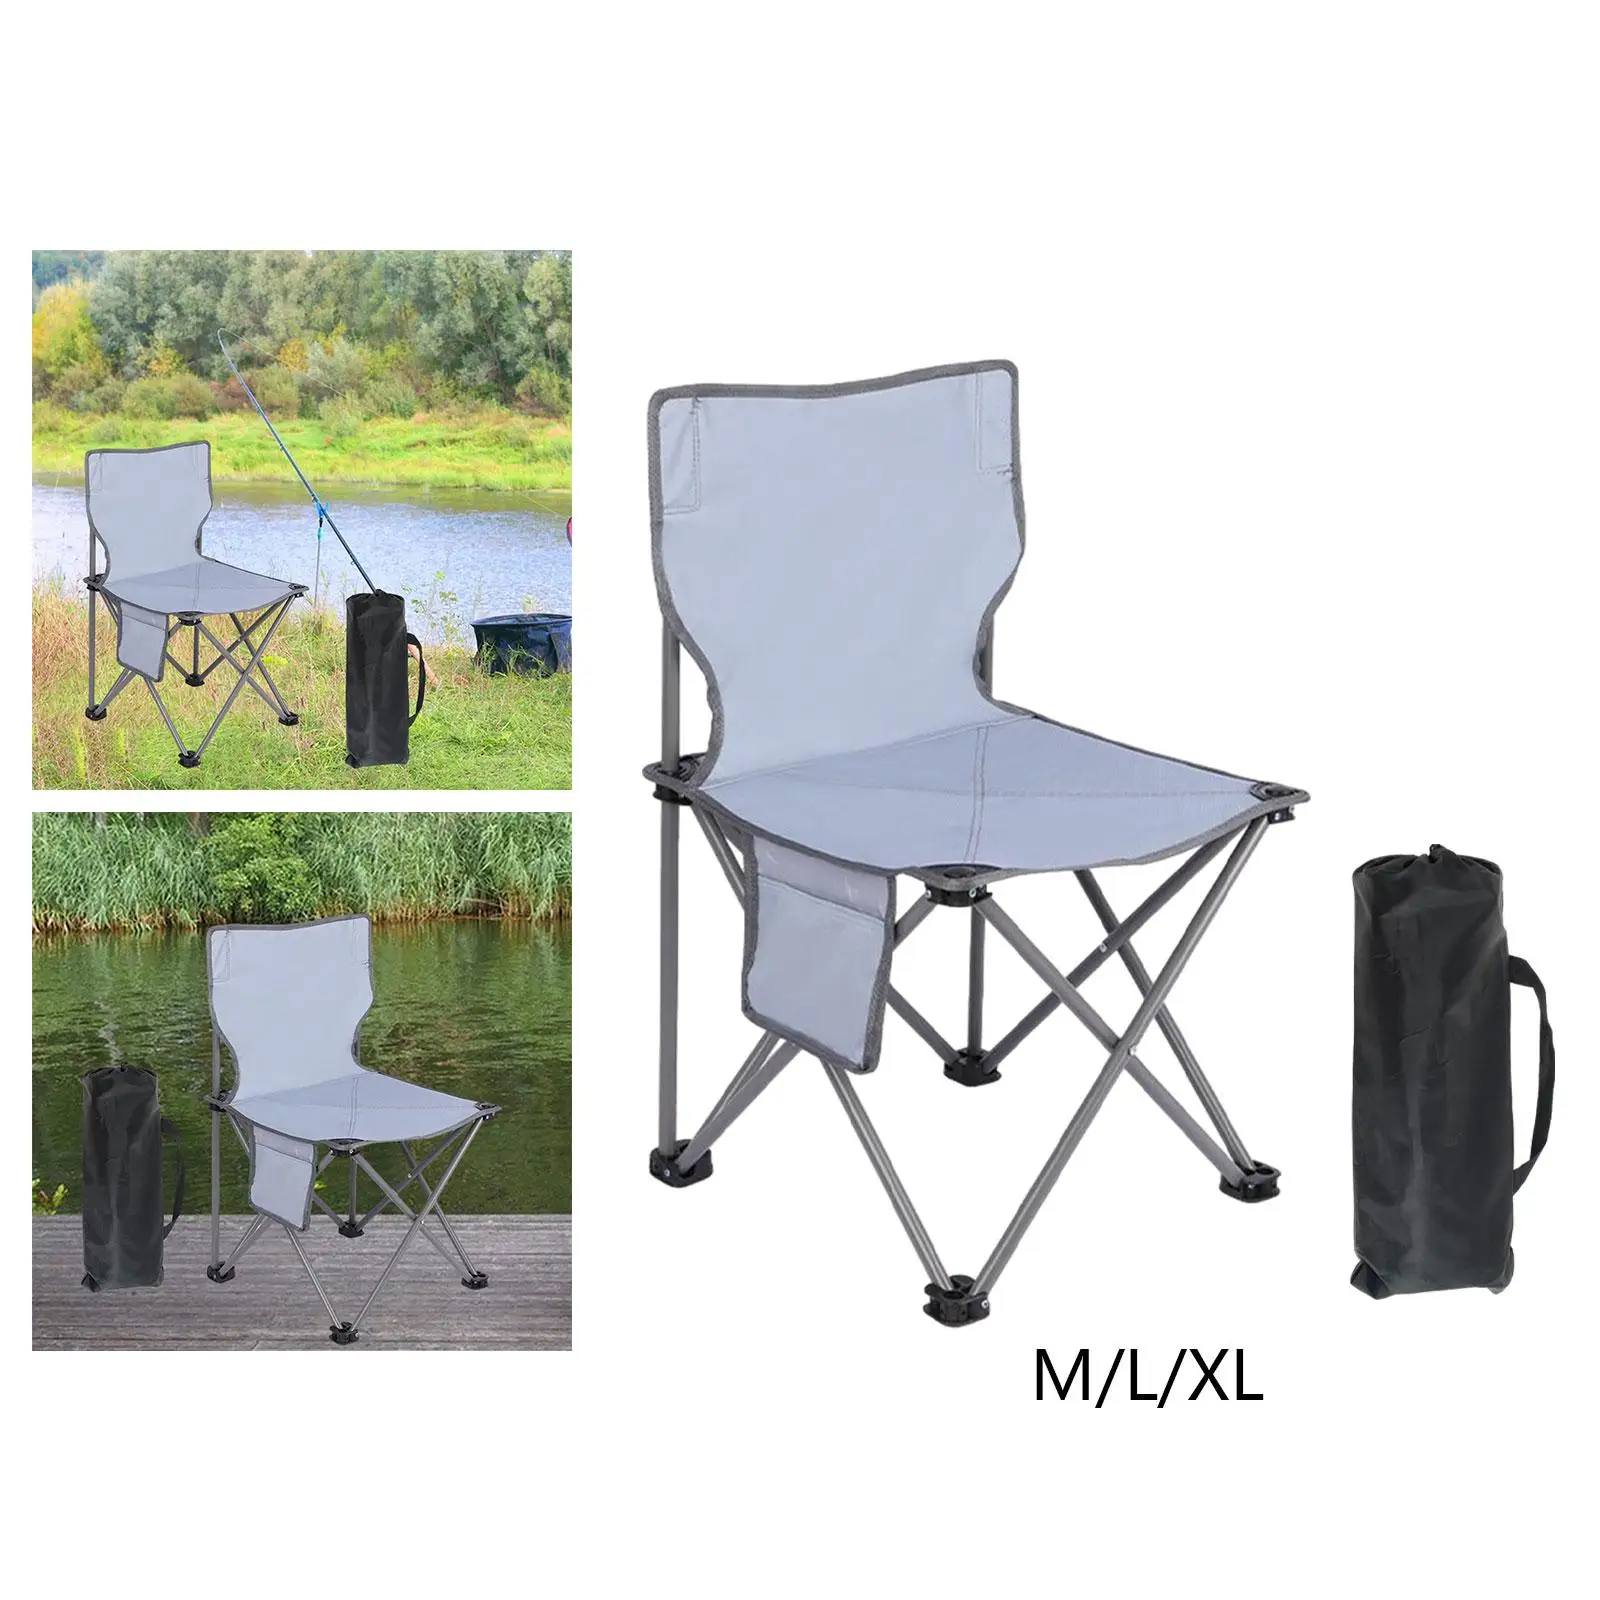 Portable Camping Chair High Back Collapsible Chair for Park Hiking Patio